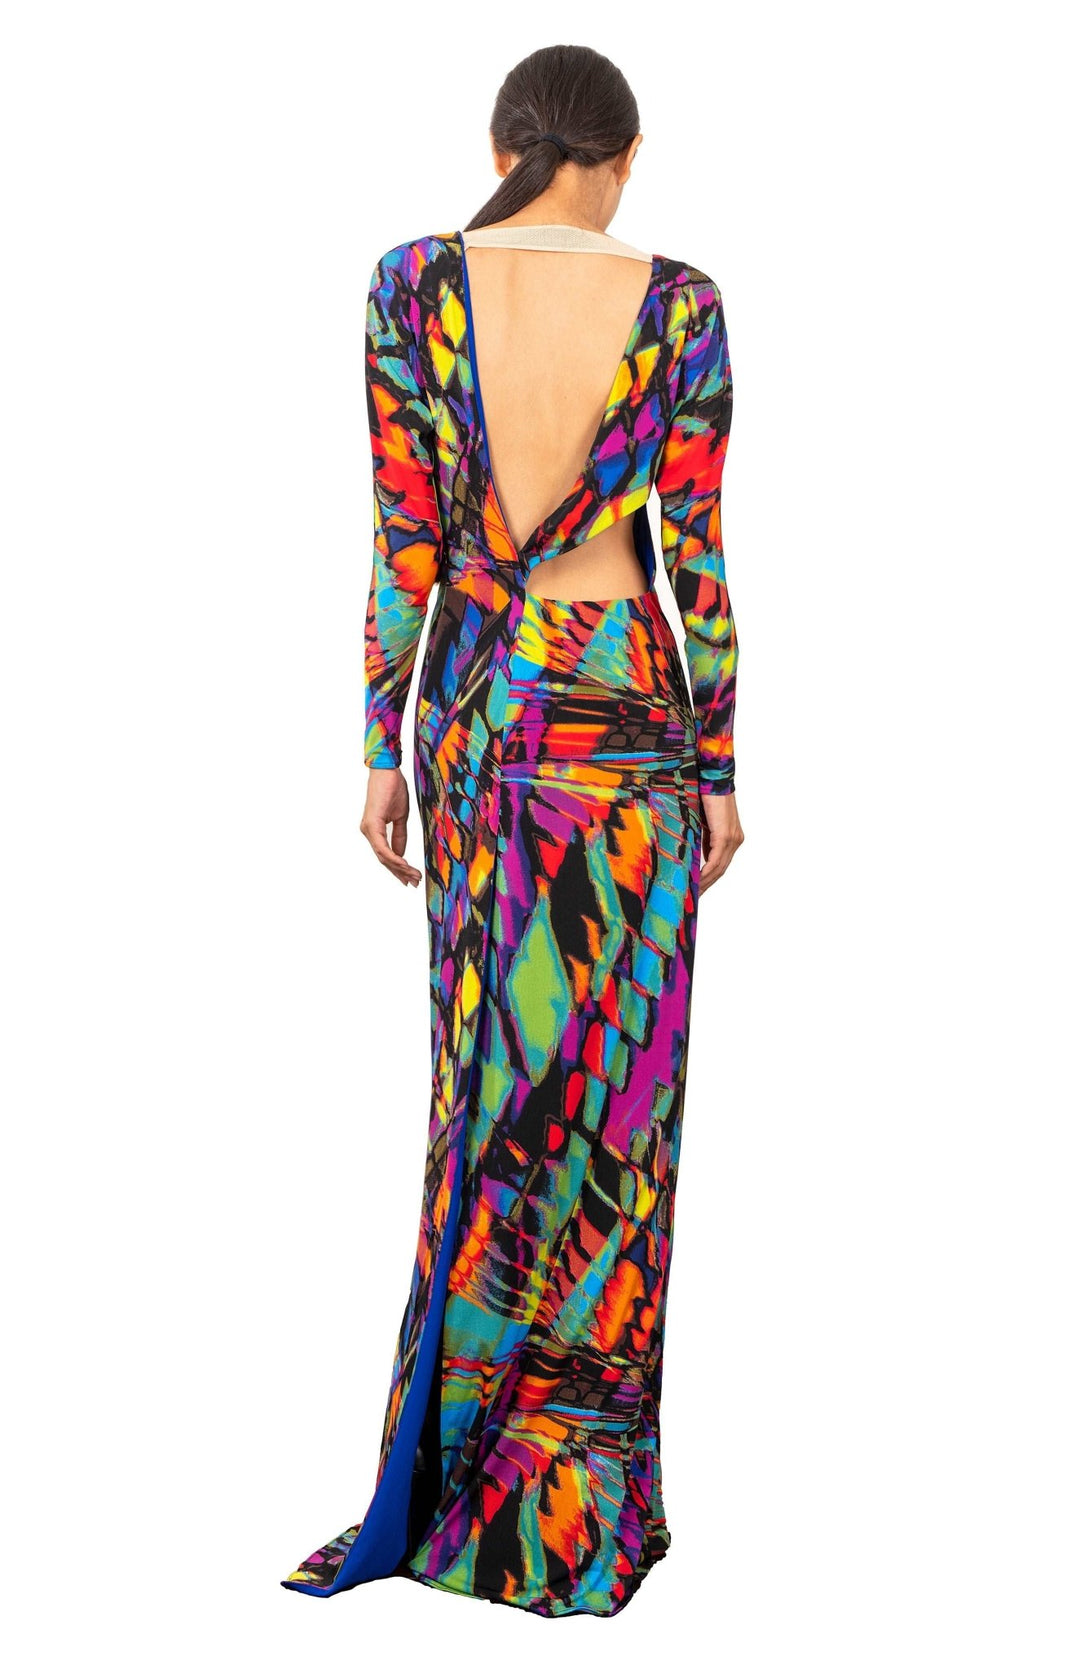 Grecian style, printed, long sleeve long dress, with back cutout detail in bright colored jersey knit